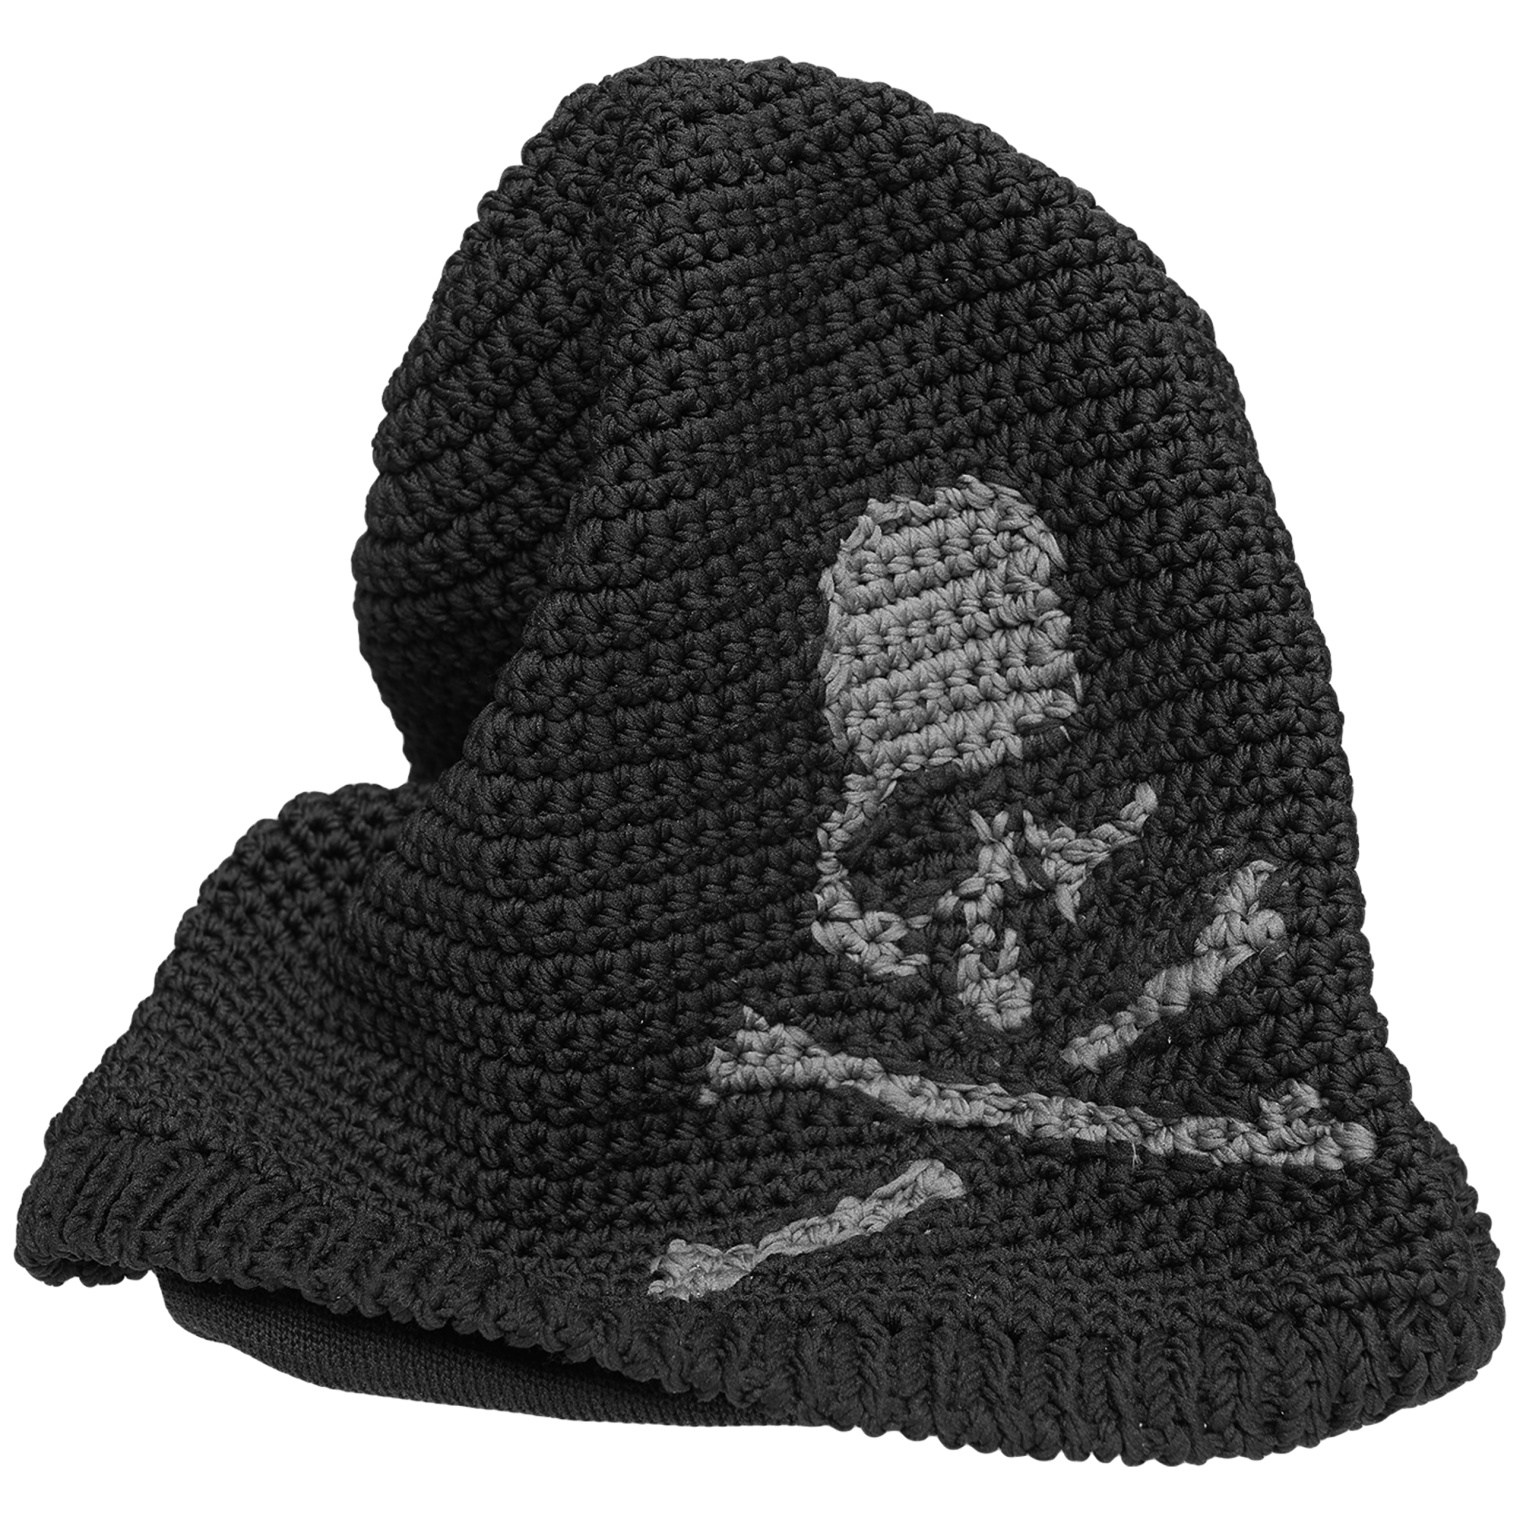 Mastermind WORLD Knitted hat with logo